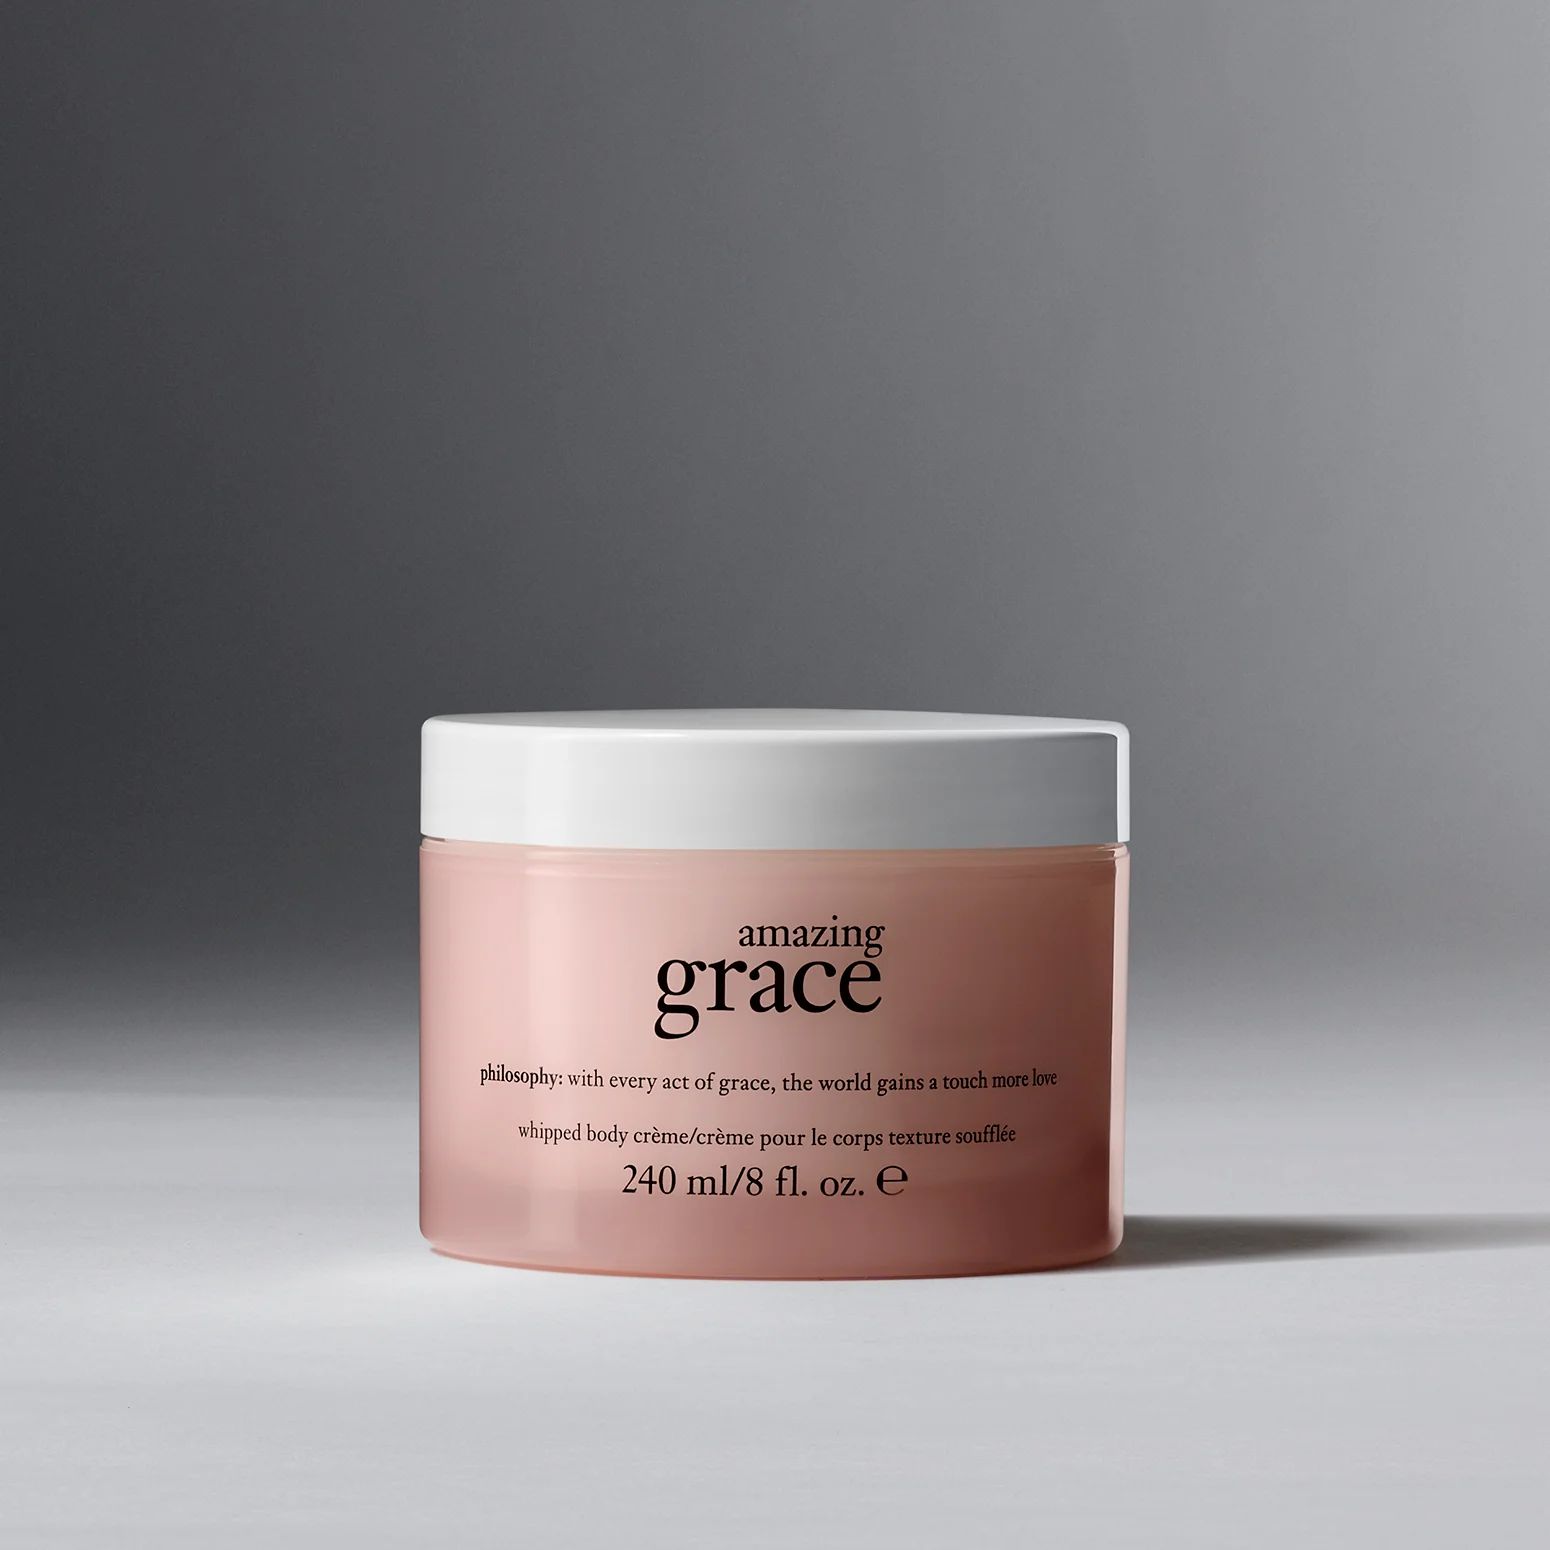 amazing grace whipped body crème | Philosophy